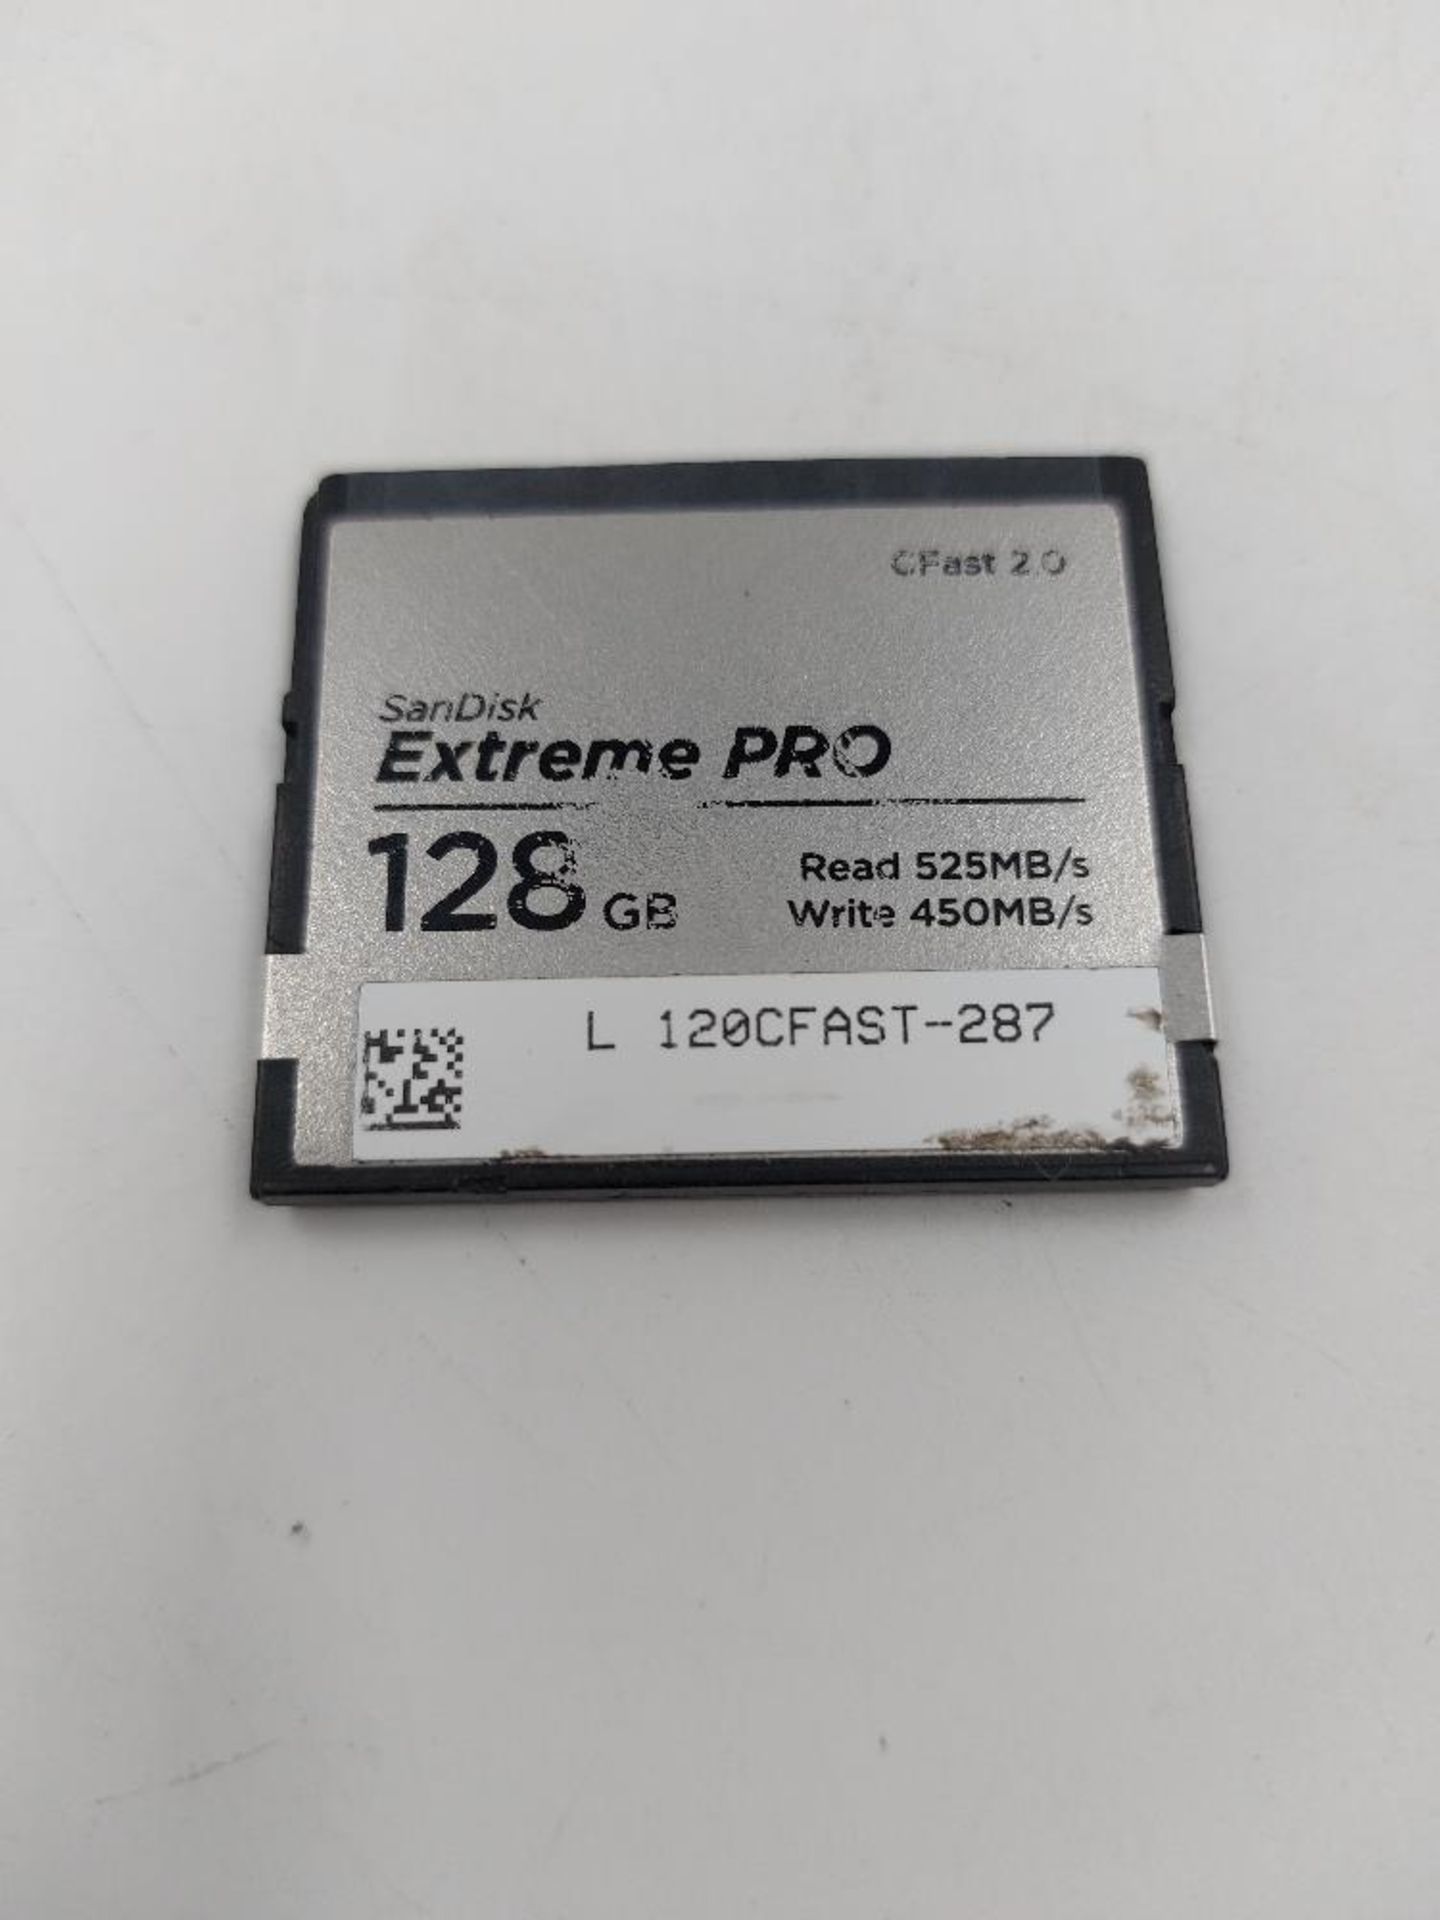 (8) Extreme Pro 128/120GB C Fast 2.0 SanDisk Memory Cards - Image 2 of 2